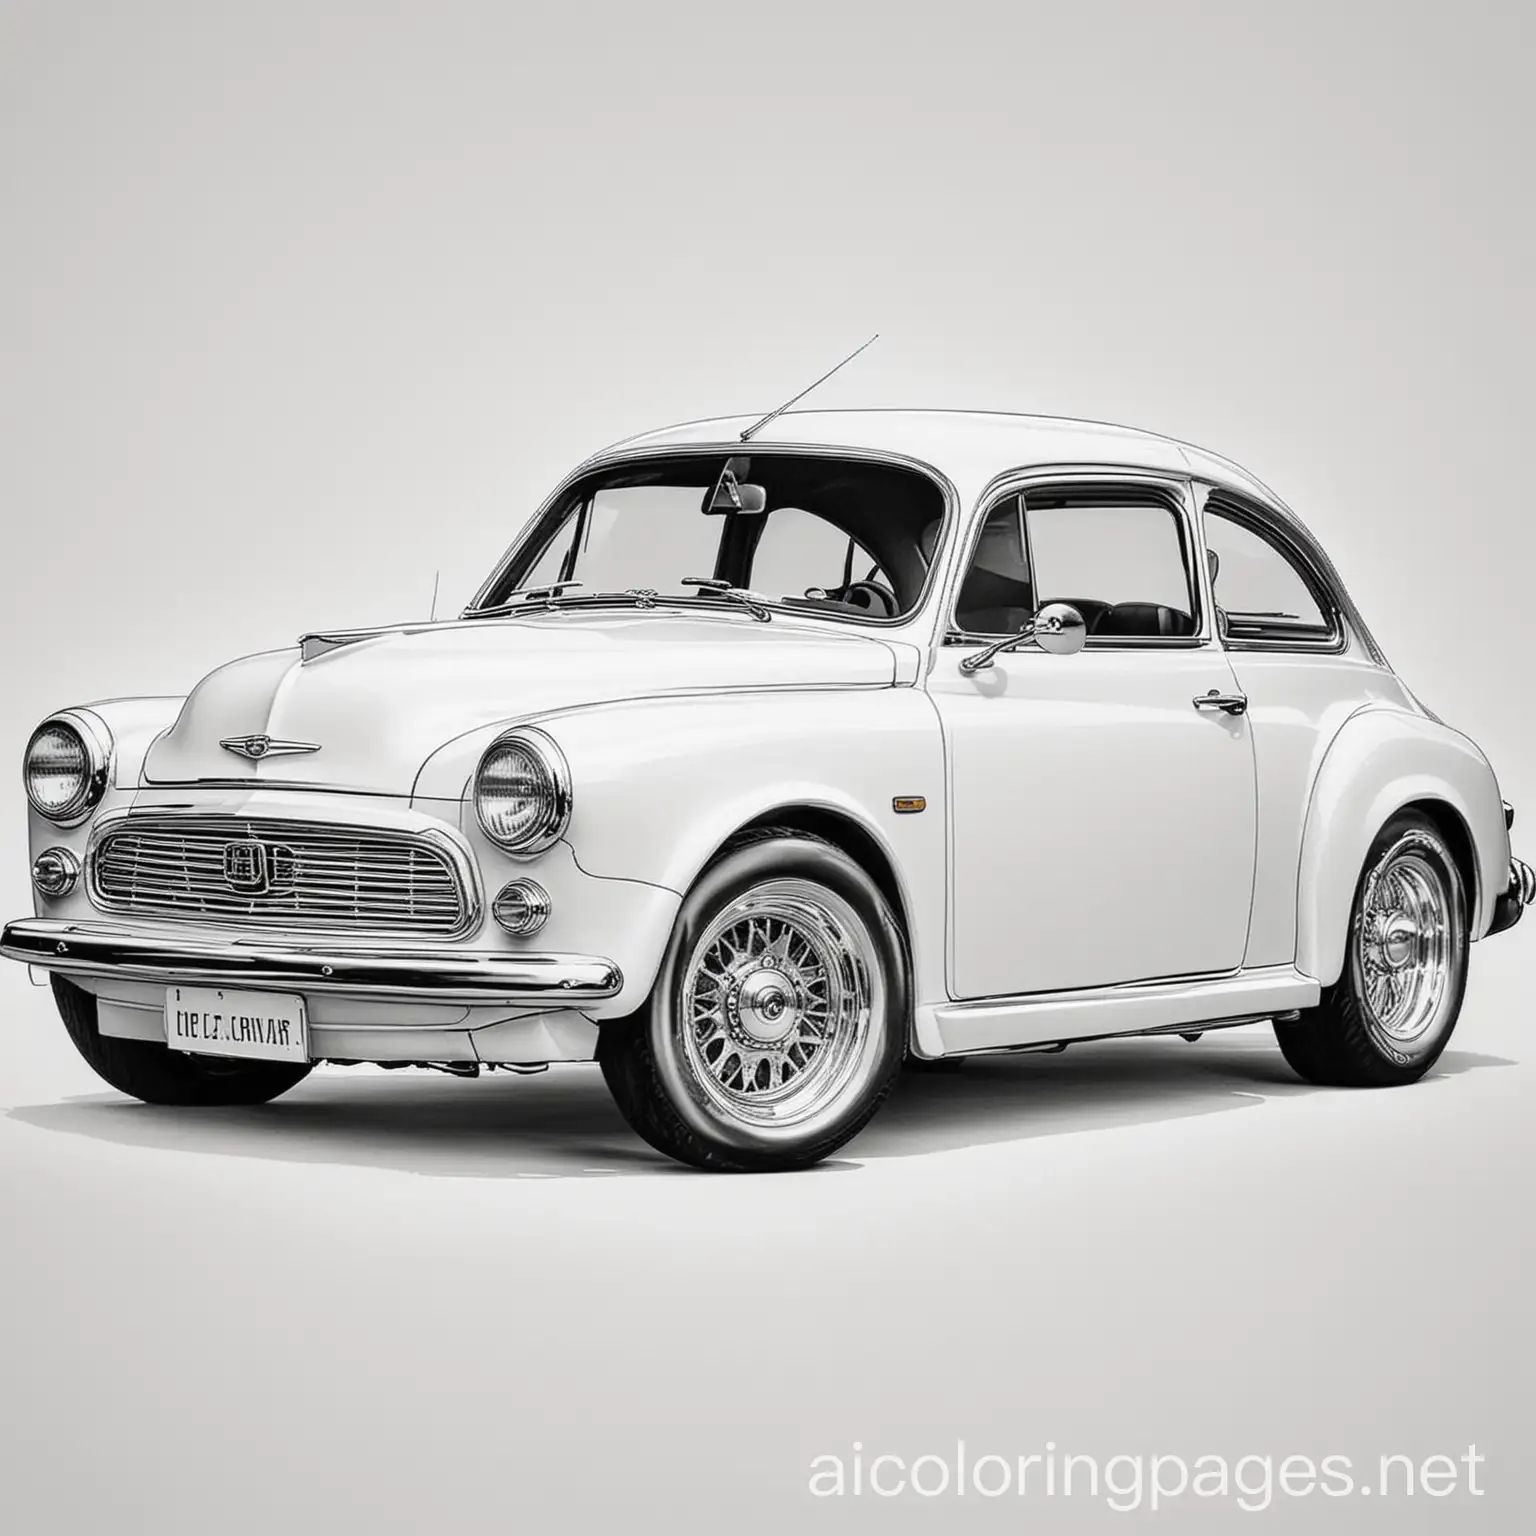 tends to be cars, Coloring Page, black and white, line art, white background, Simplicity, Ample White Space